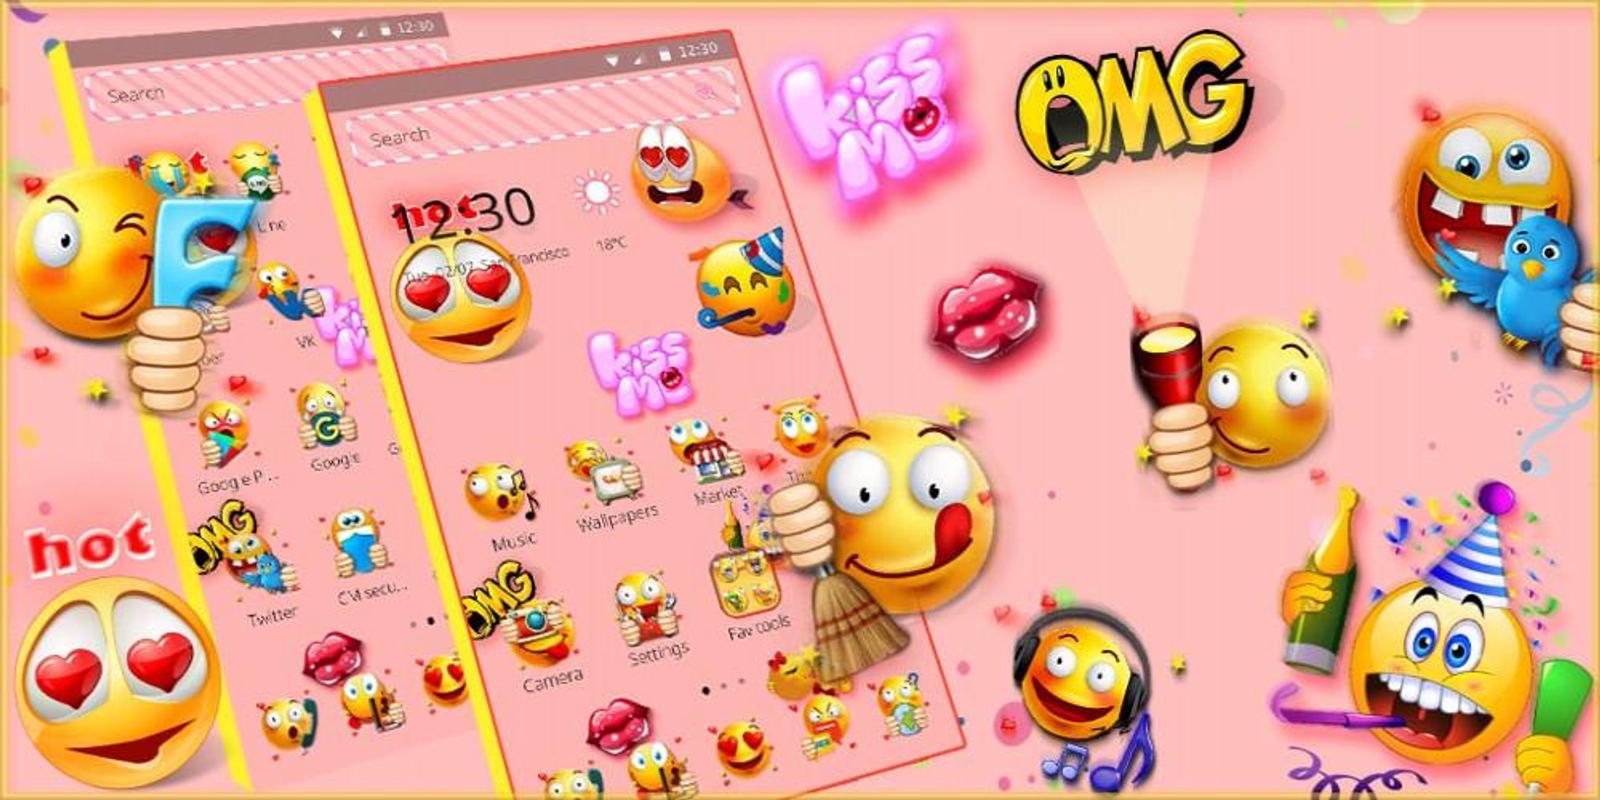 Emoji Wallpaper Theme for Android - APK Download